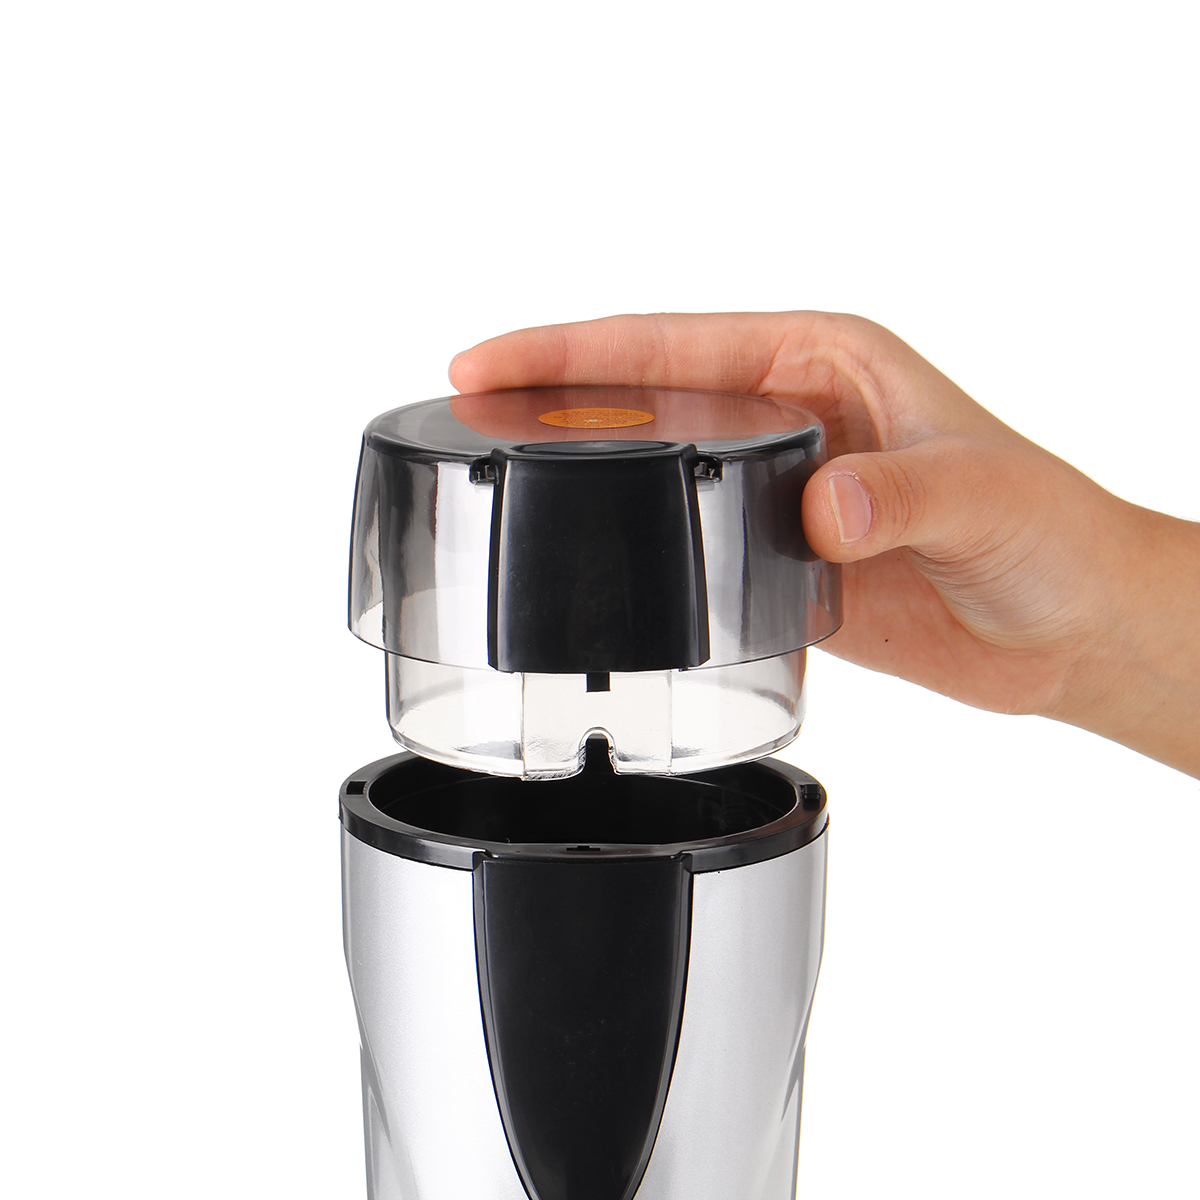 Portable-Electric-Coffee-Grinder-Beans-Nuts-Milling-Grinding-Machine-1597658